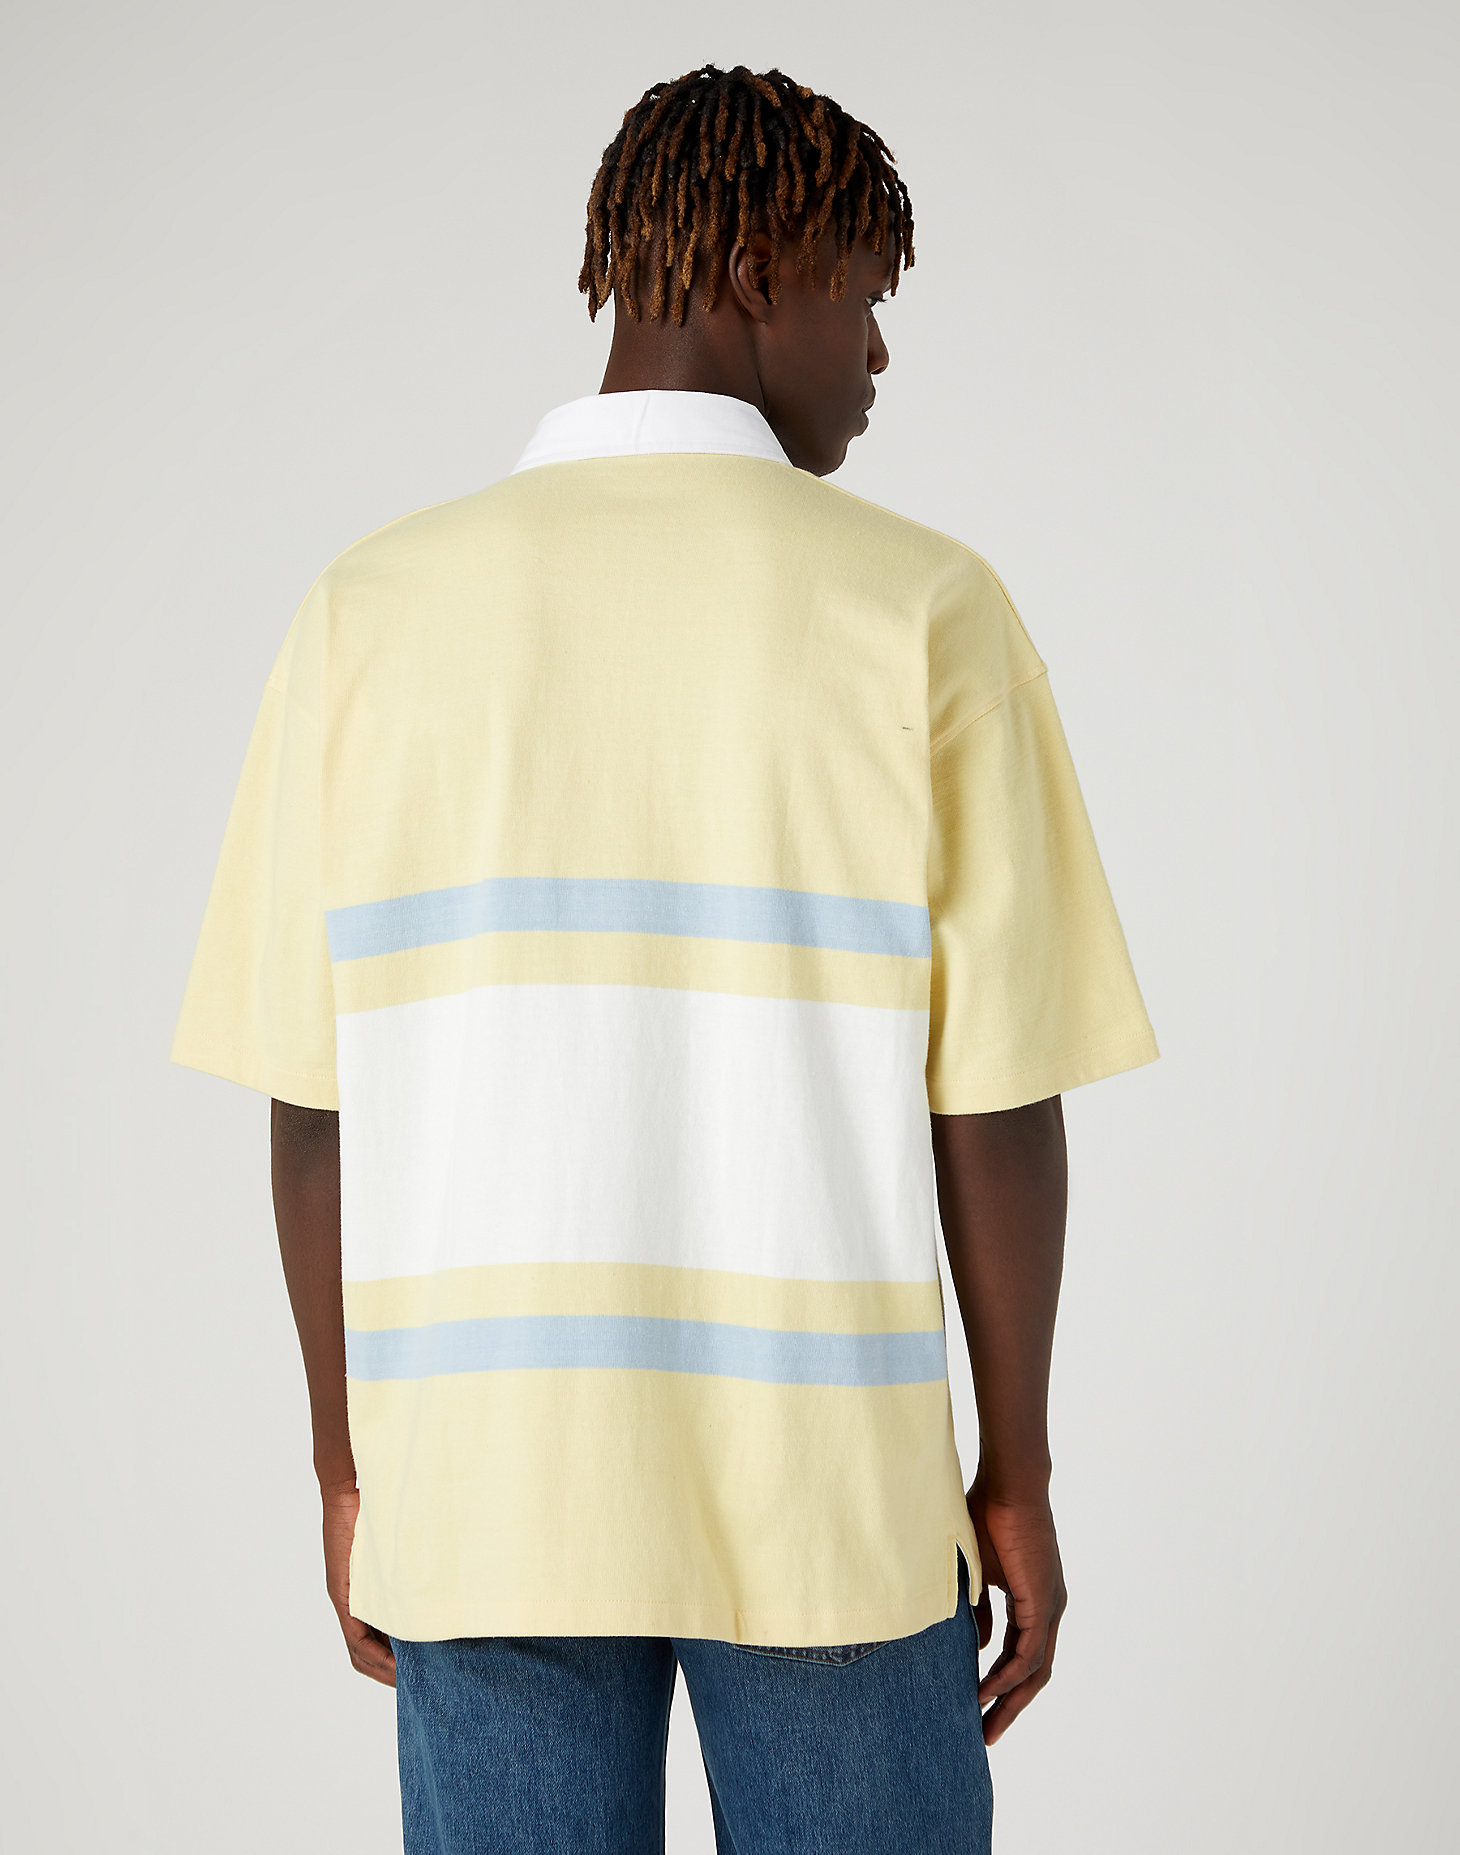 Rugby Polo Shirt in Pineapple Slice alternative view 2